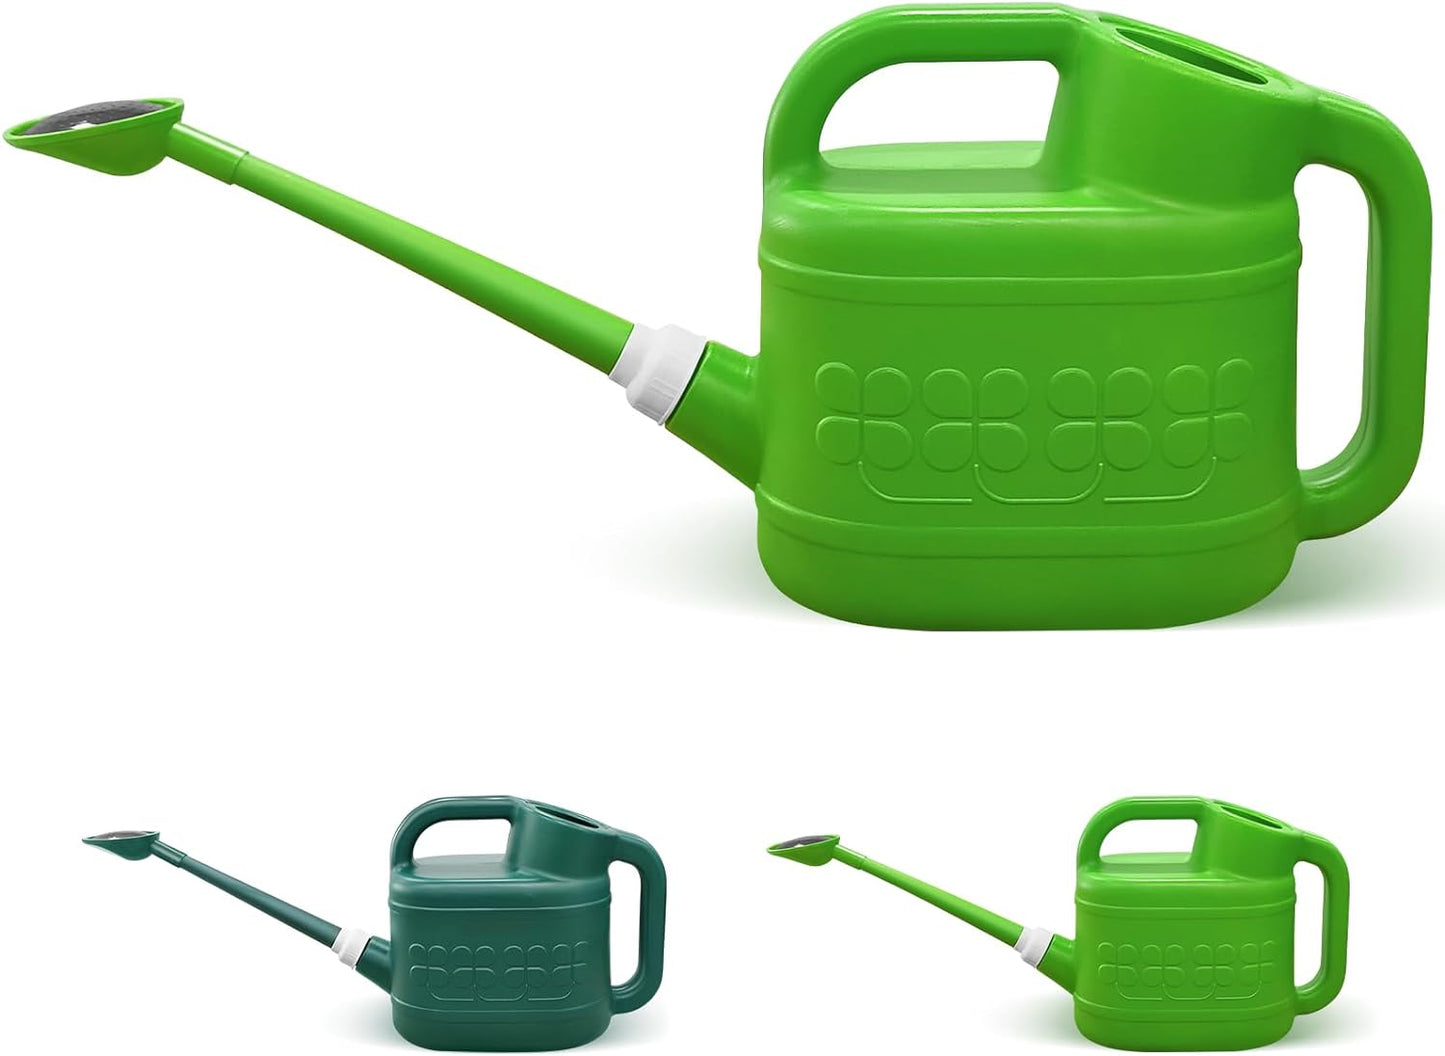 2 Gallon Watering Can Plastic Watering Cans with Removable Nozzle and Long Spout for House Plant Garden Flower